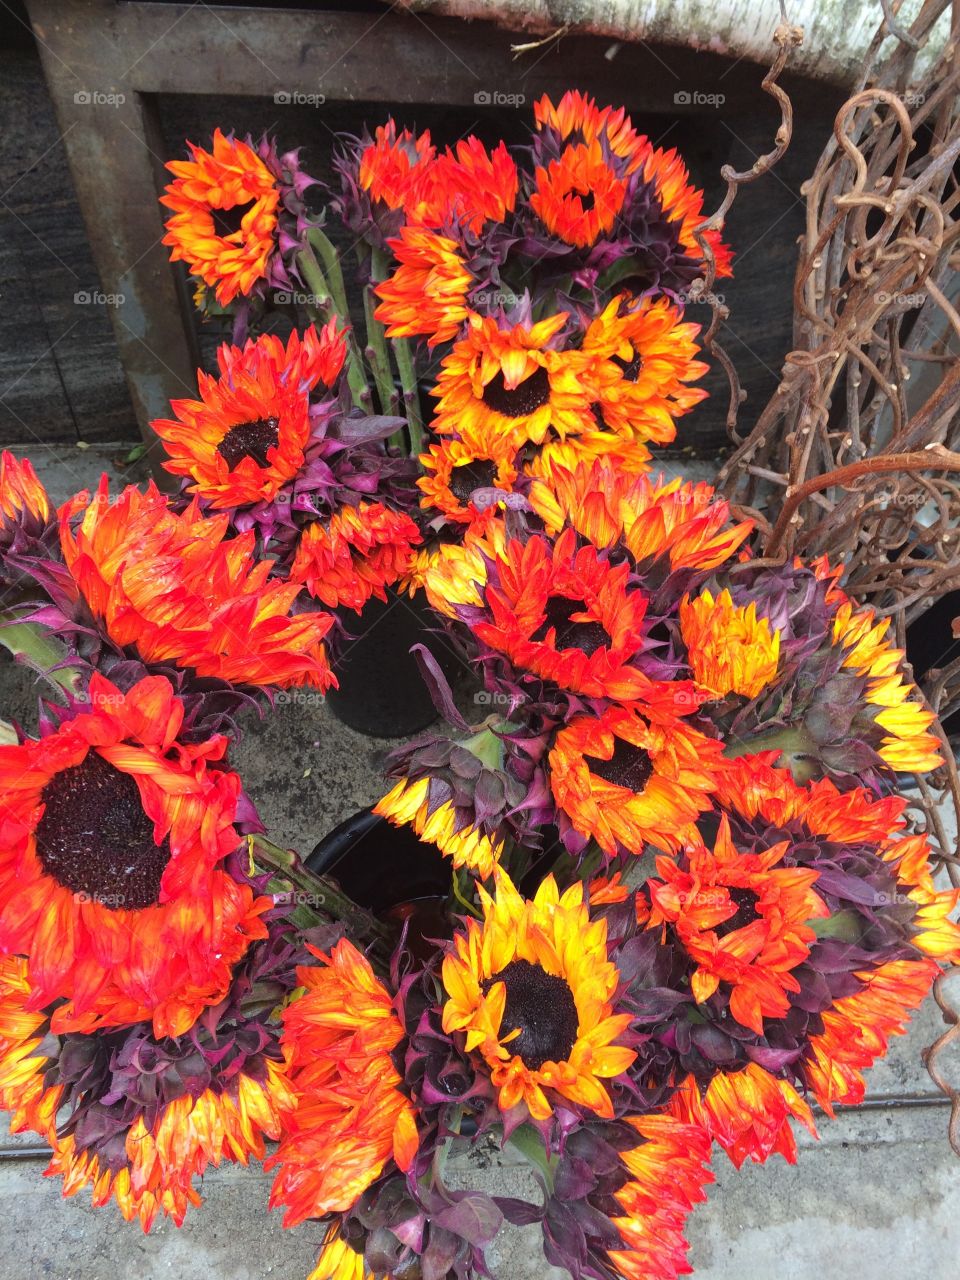 Vivid Sunflowers. Intense orange sunflowers for sale in the flower district, Chelsea, New York City